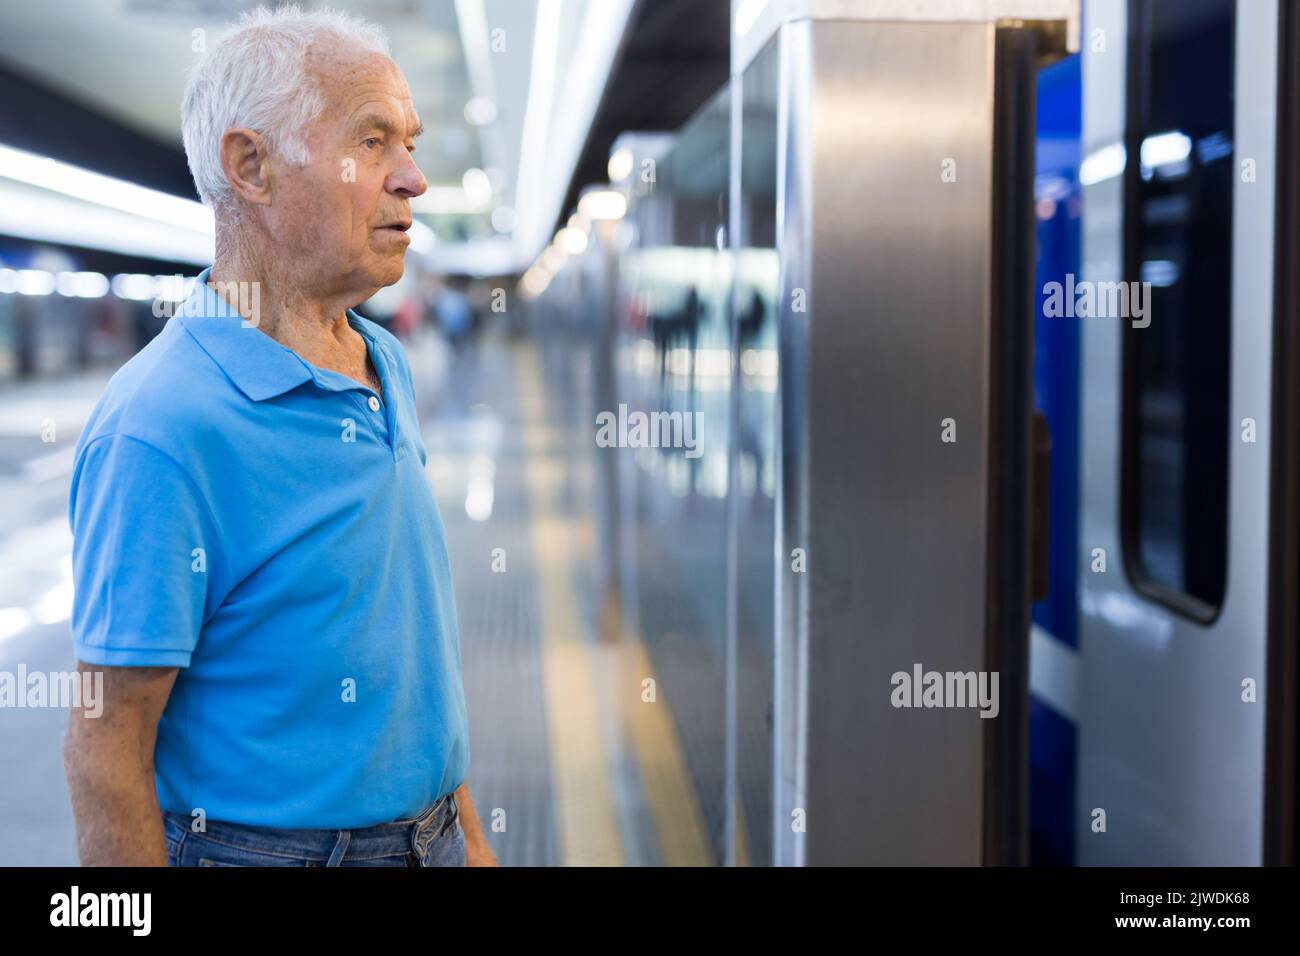 Elderly man getting on modern subway car. Concept of daily city trips Stock Photo